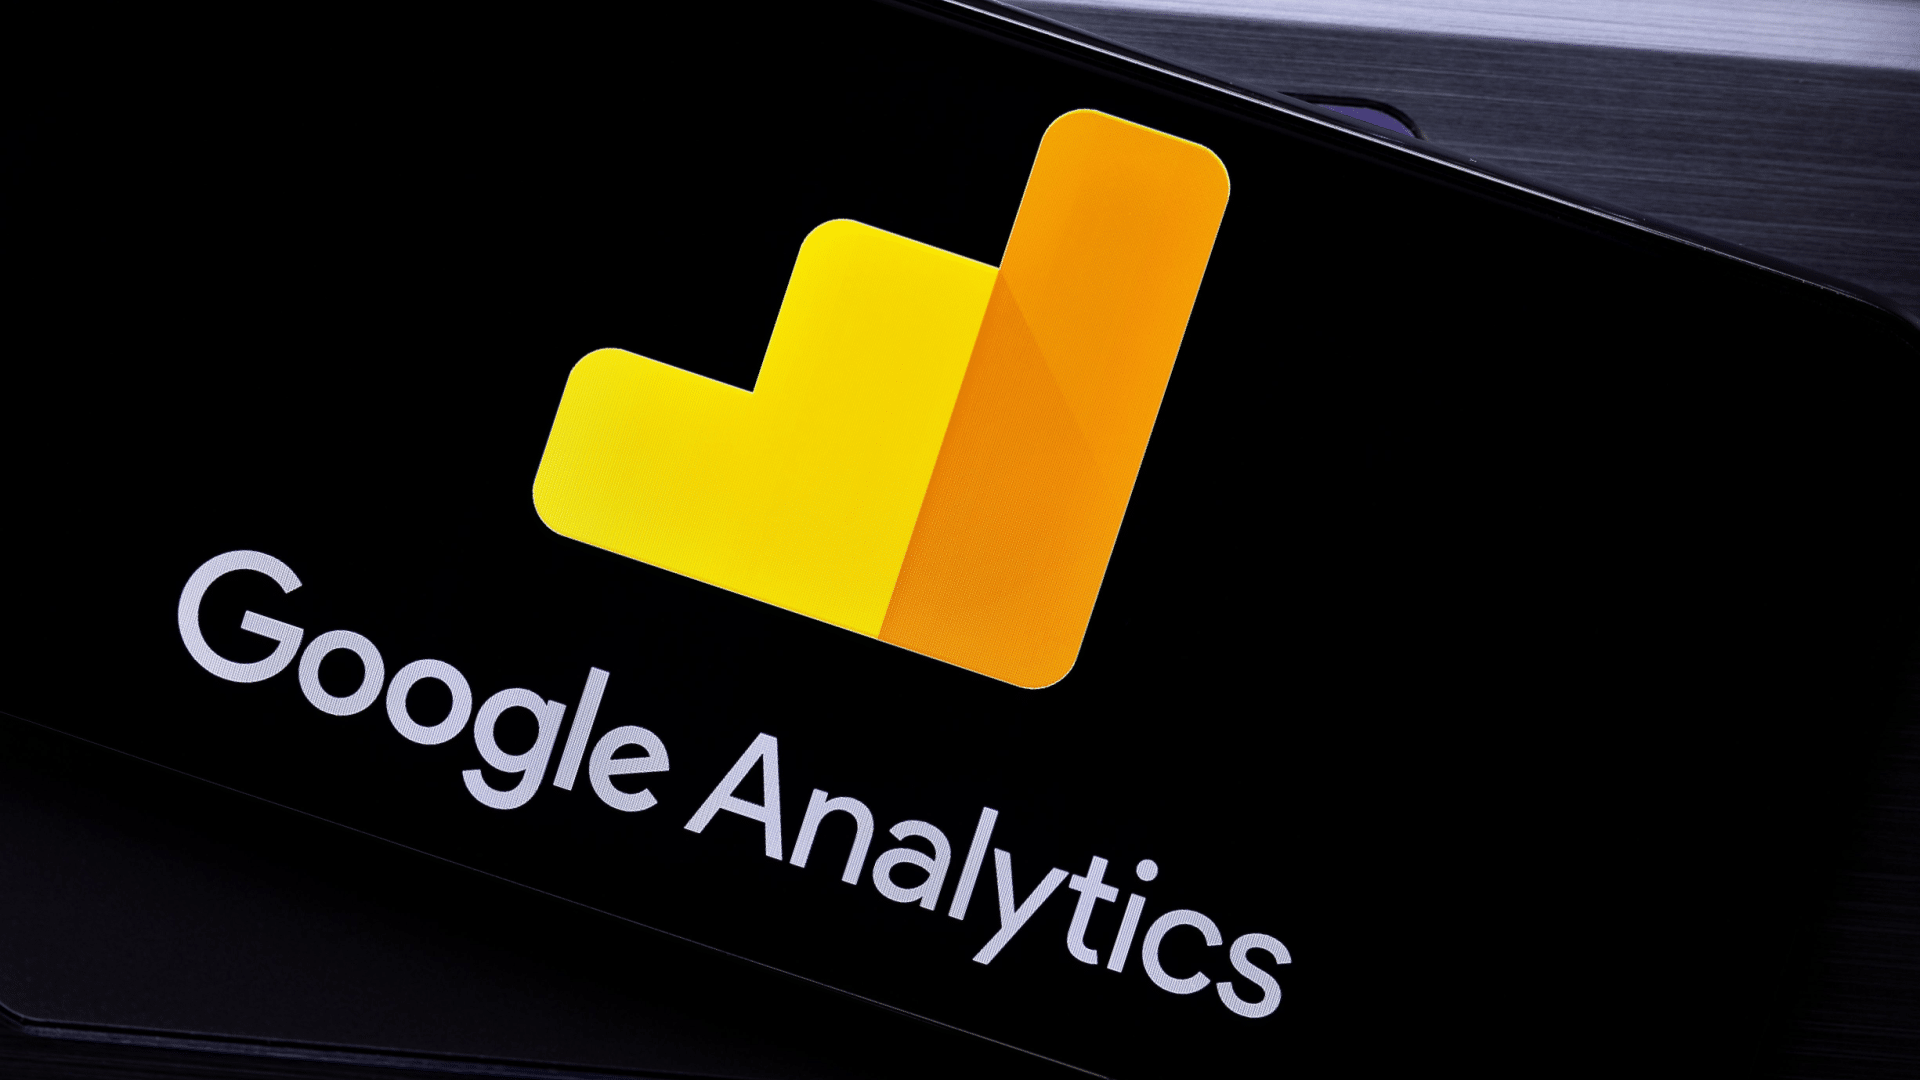 Event tracking in Google Analytics 4: What marketers need to know